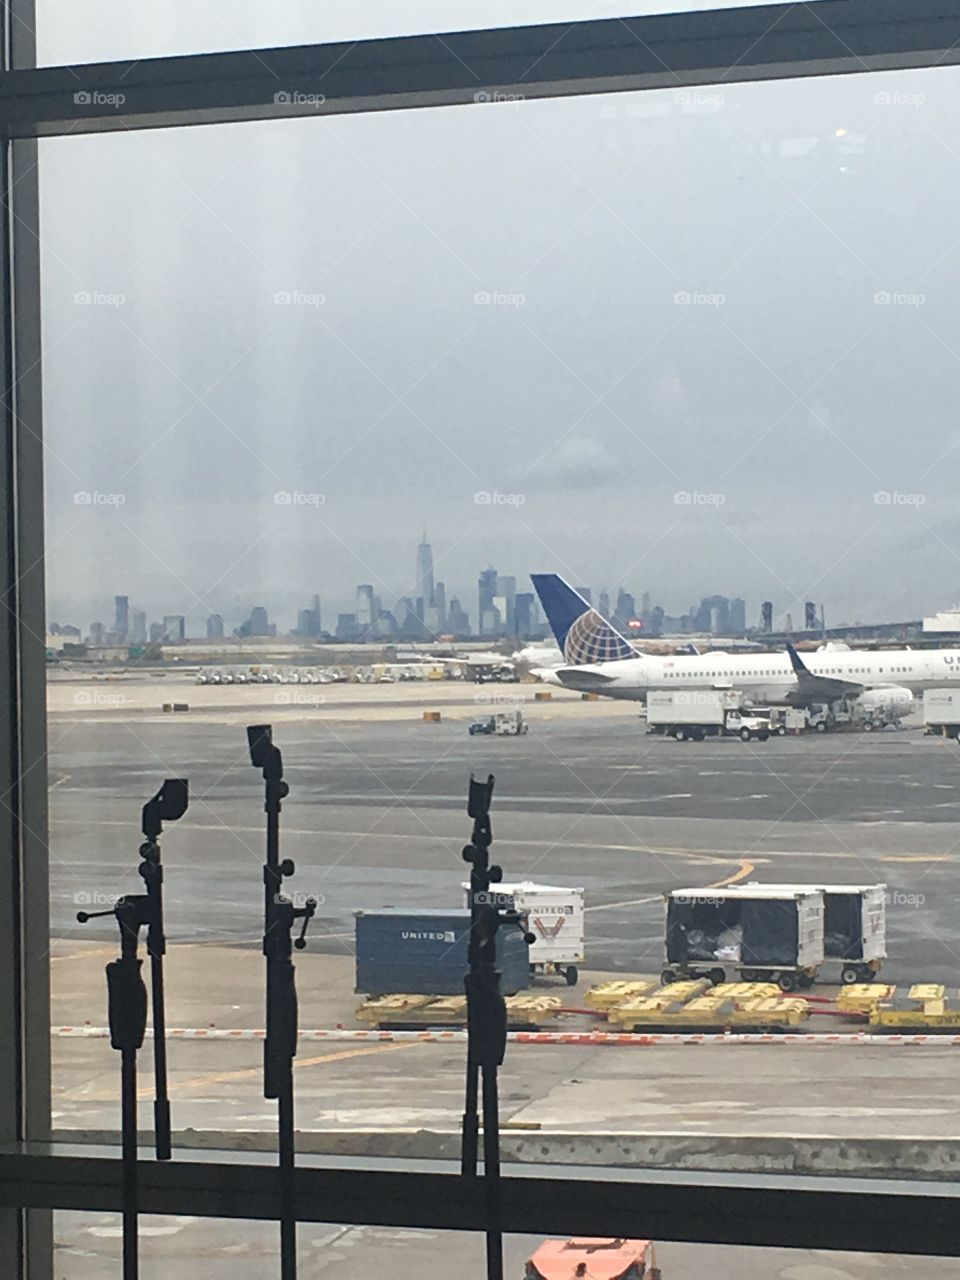 Layover in Newark, NJ with a view of Manhattan in the distance.